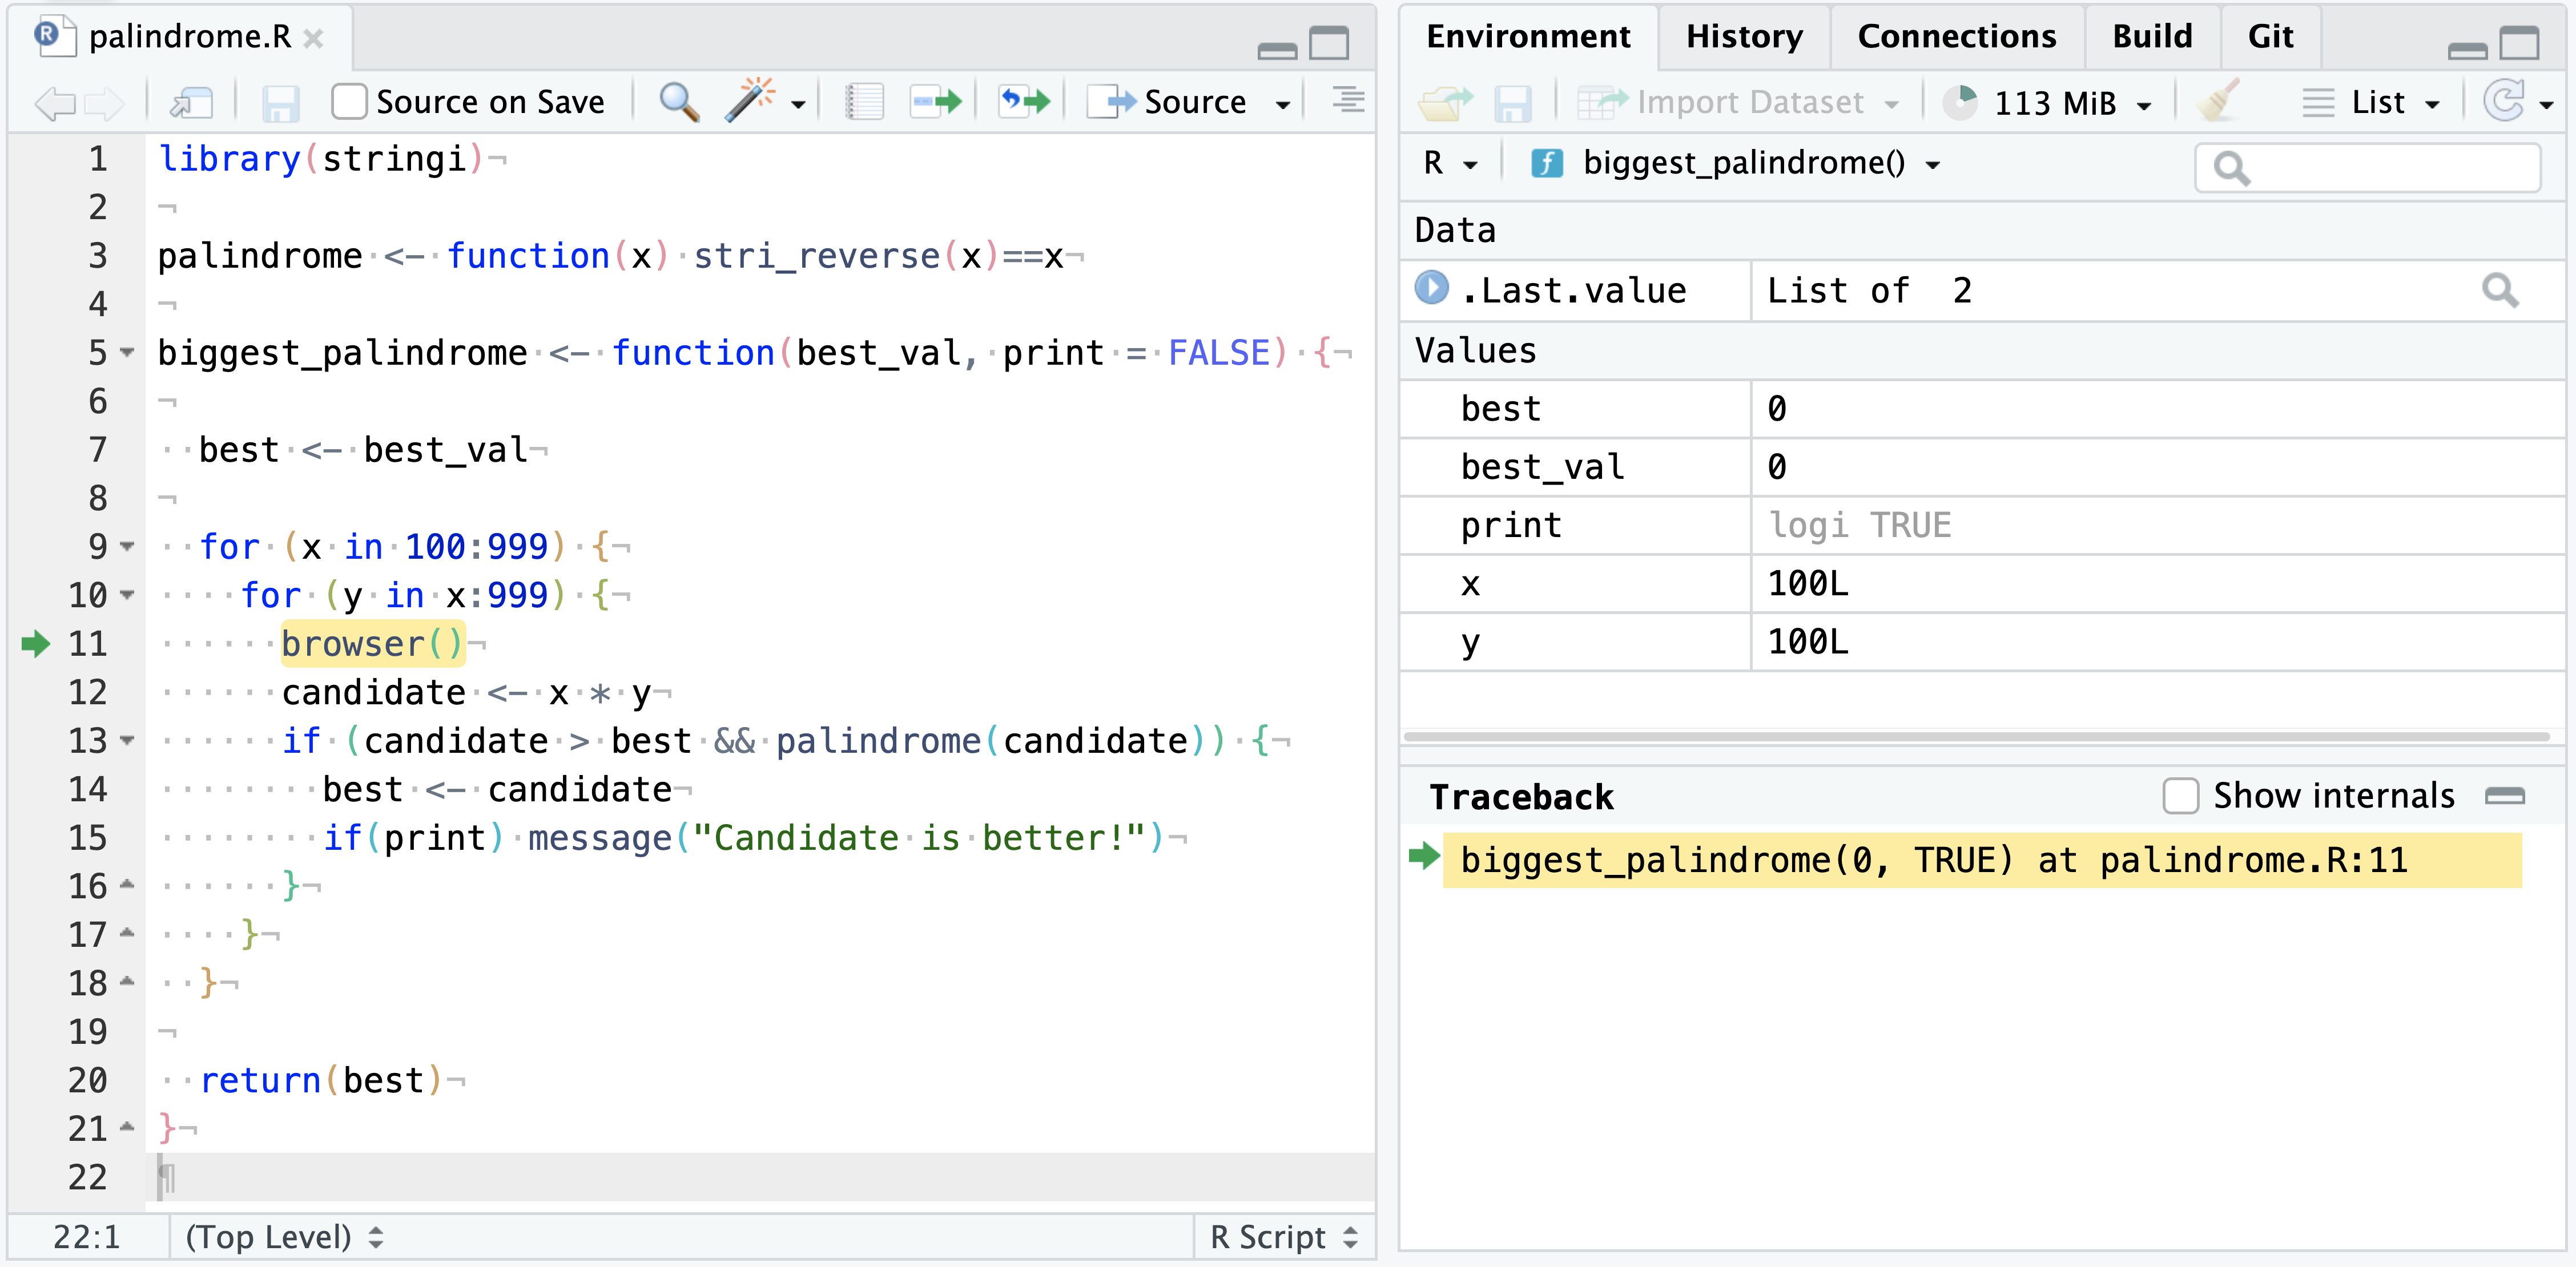 A screenshot of R code with a browser() call, along with the traceback.